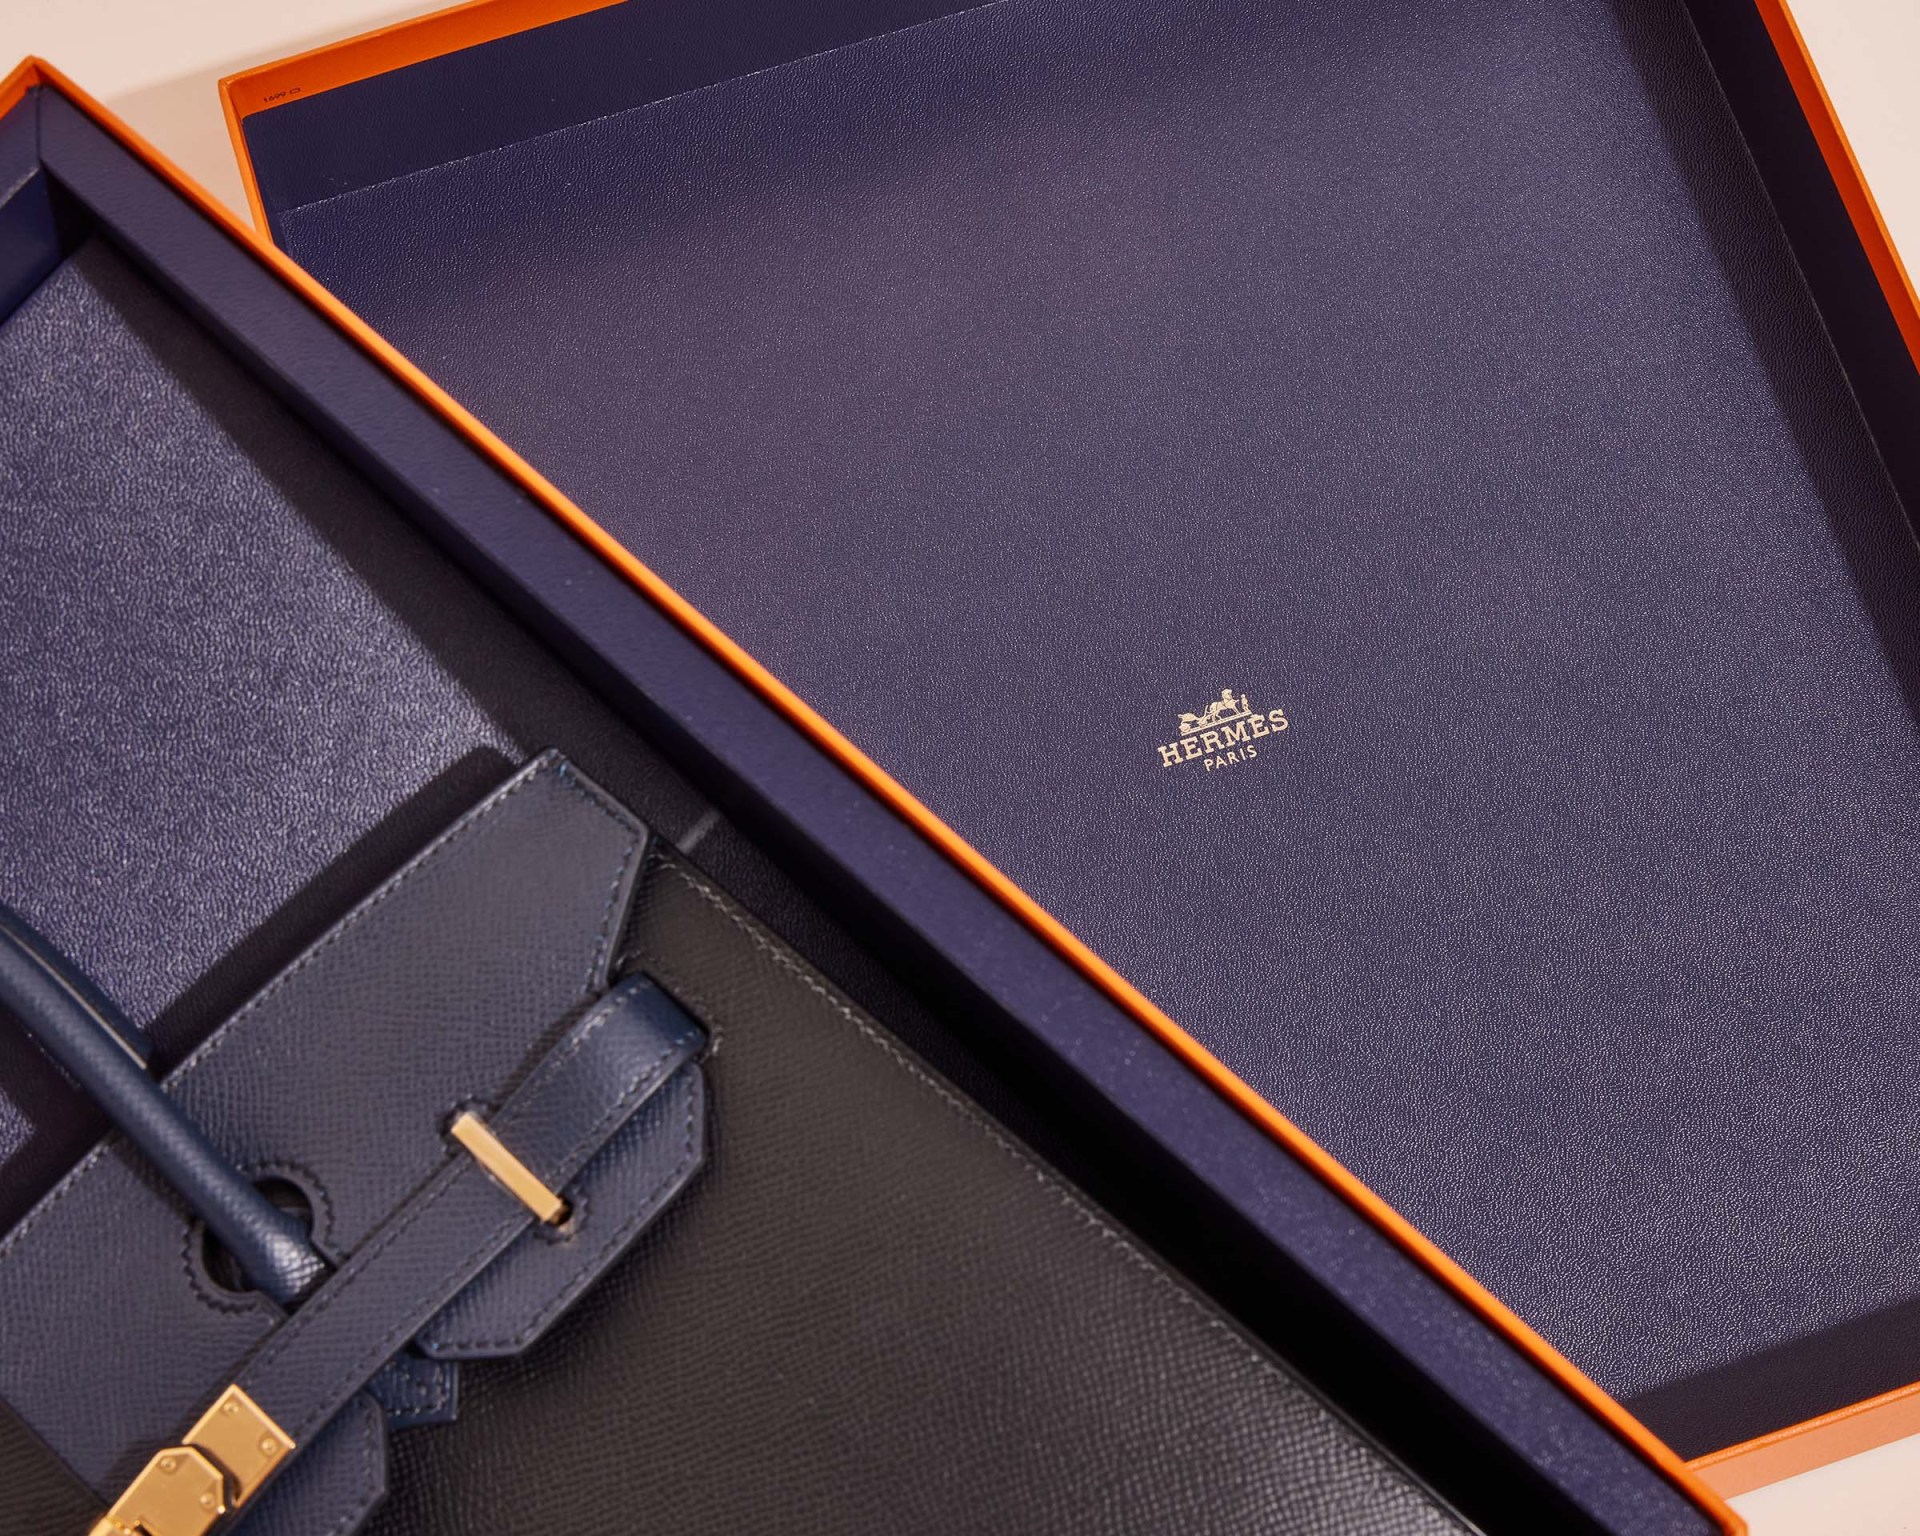 product image of special edition hermes bag in special edition box